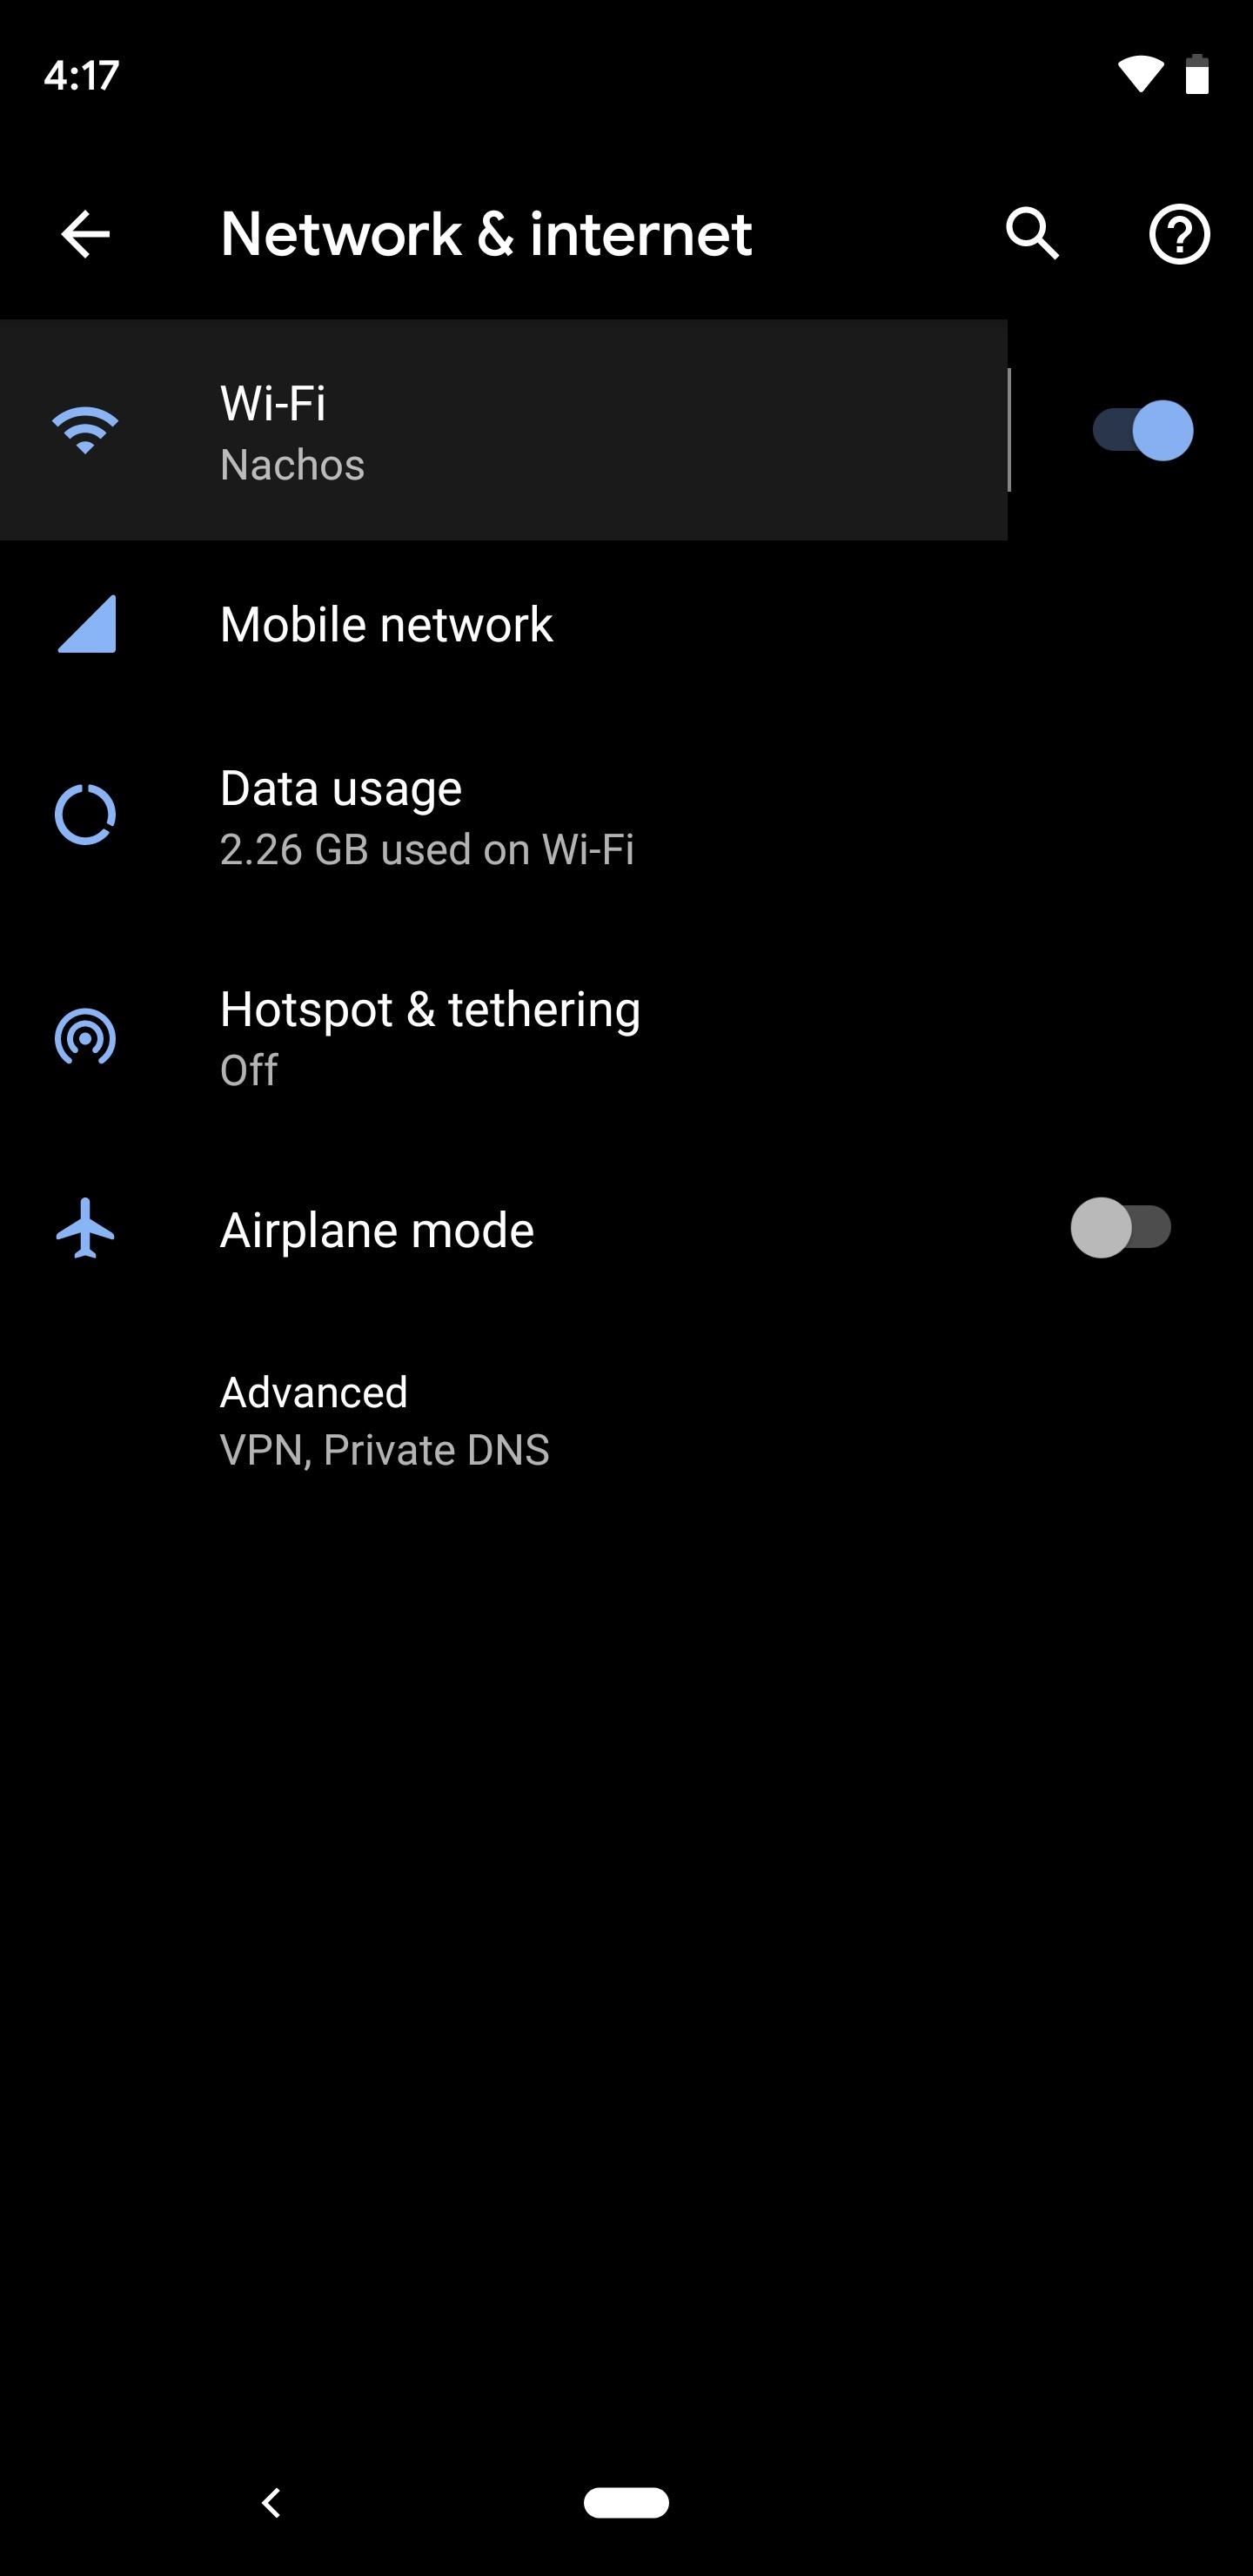 How to Share Your Wi-Fi Password with a QR Code in Android 10